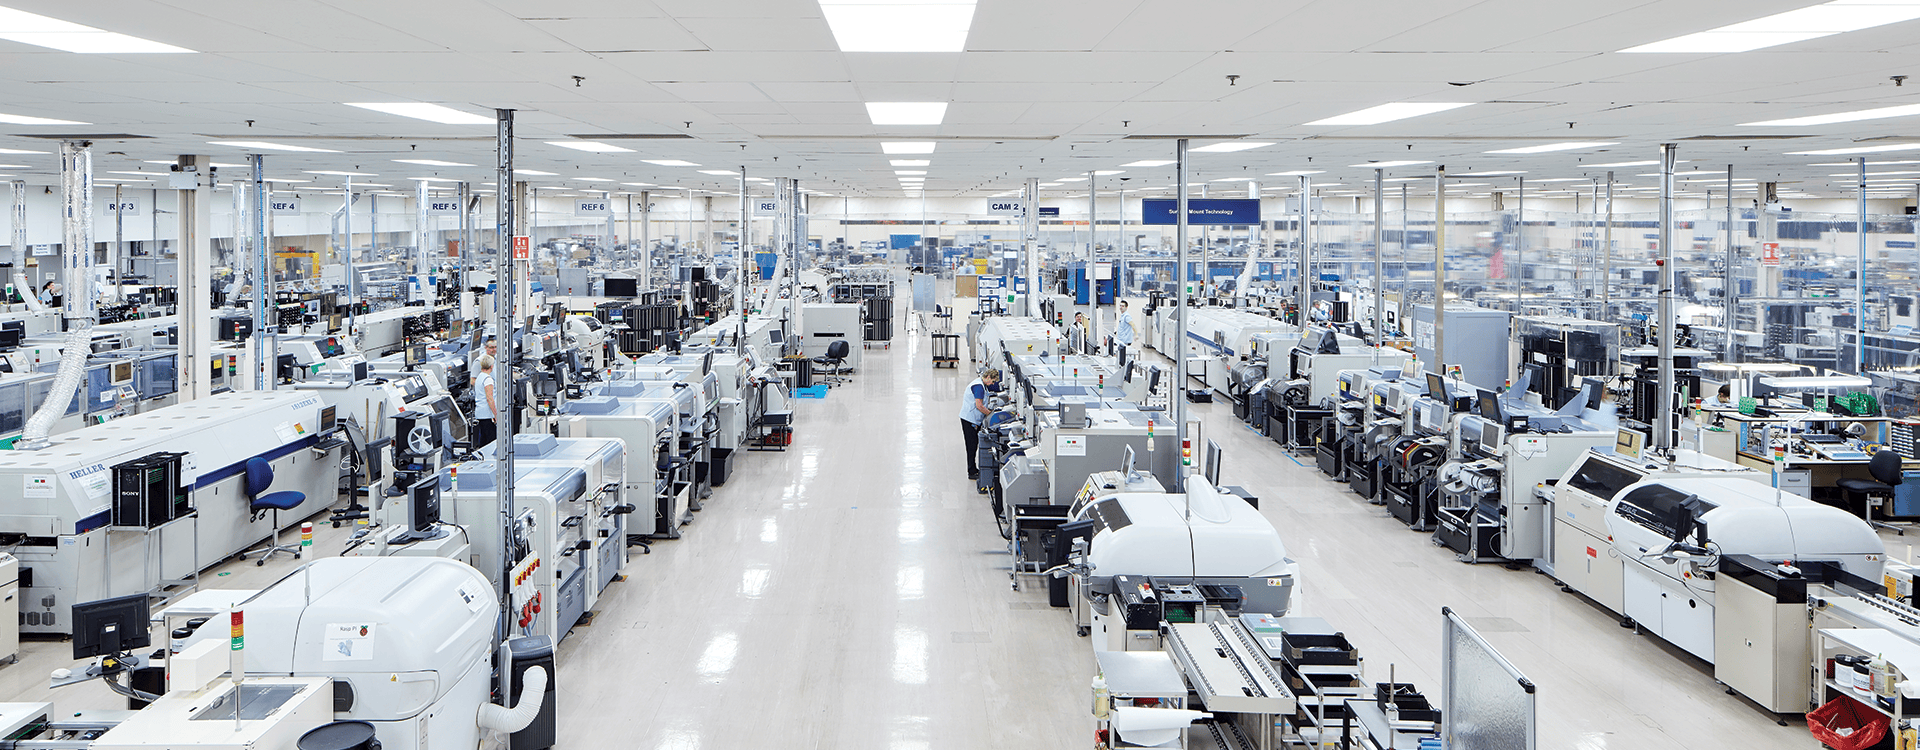 An areal photo of a factory floor with rows of white machines.